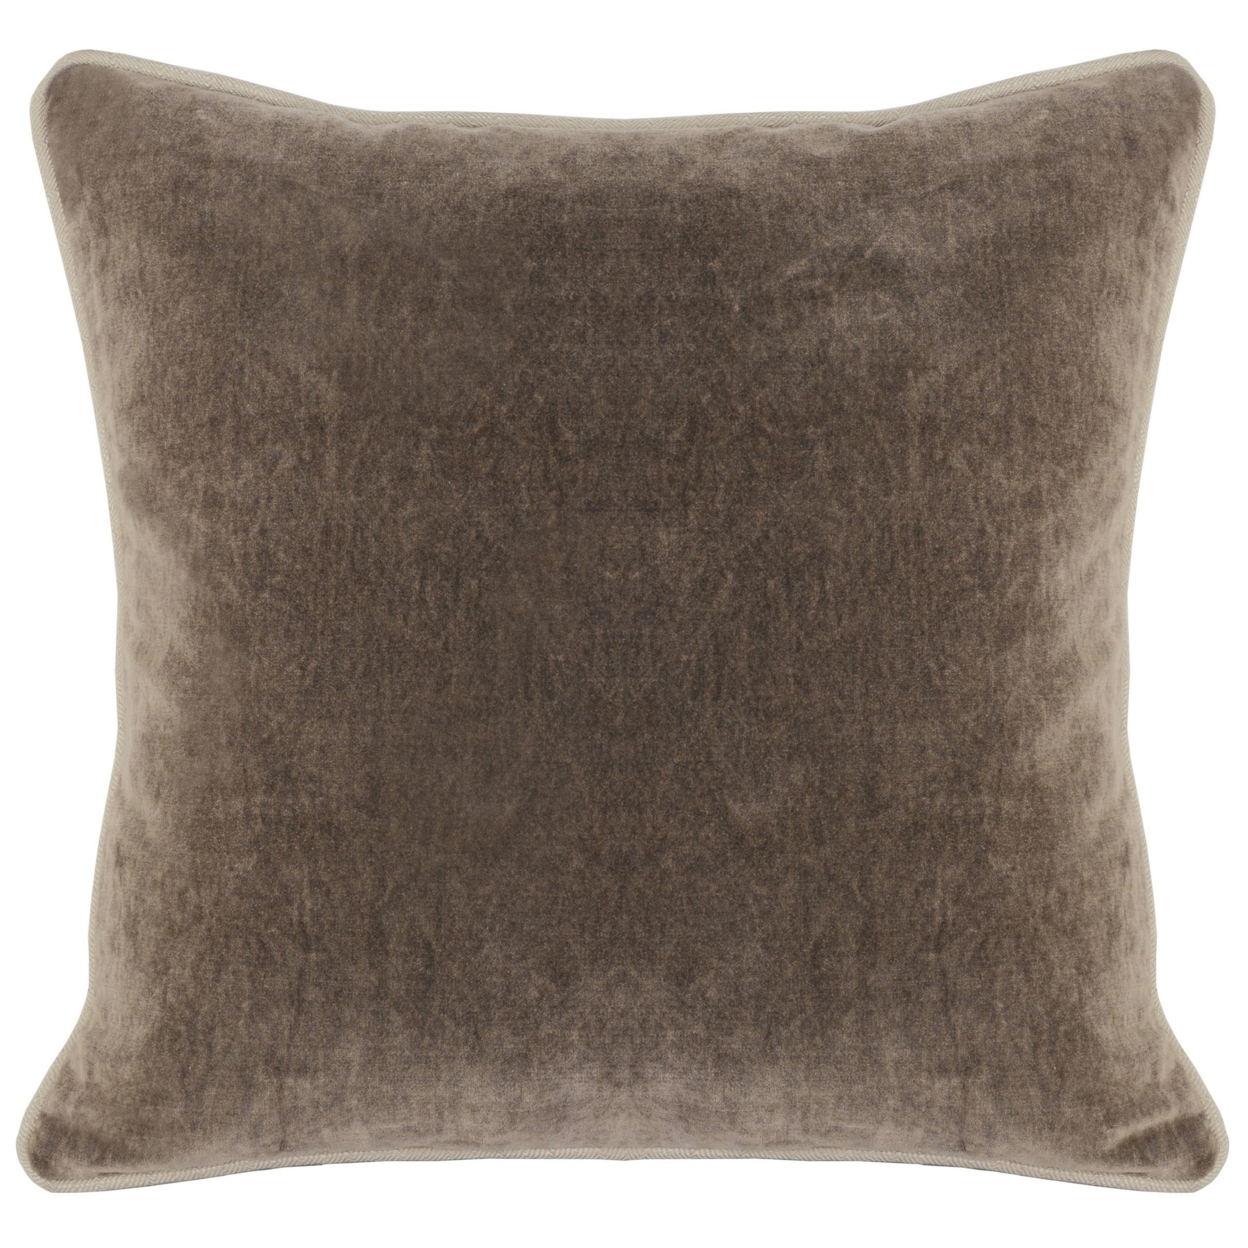 Square Fabric Throw Pillow With Solid Color And Piped Edges, Taupe Brown- Saltoro Sherpi